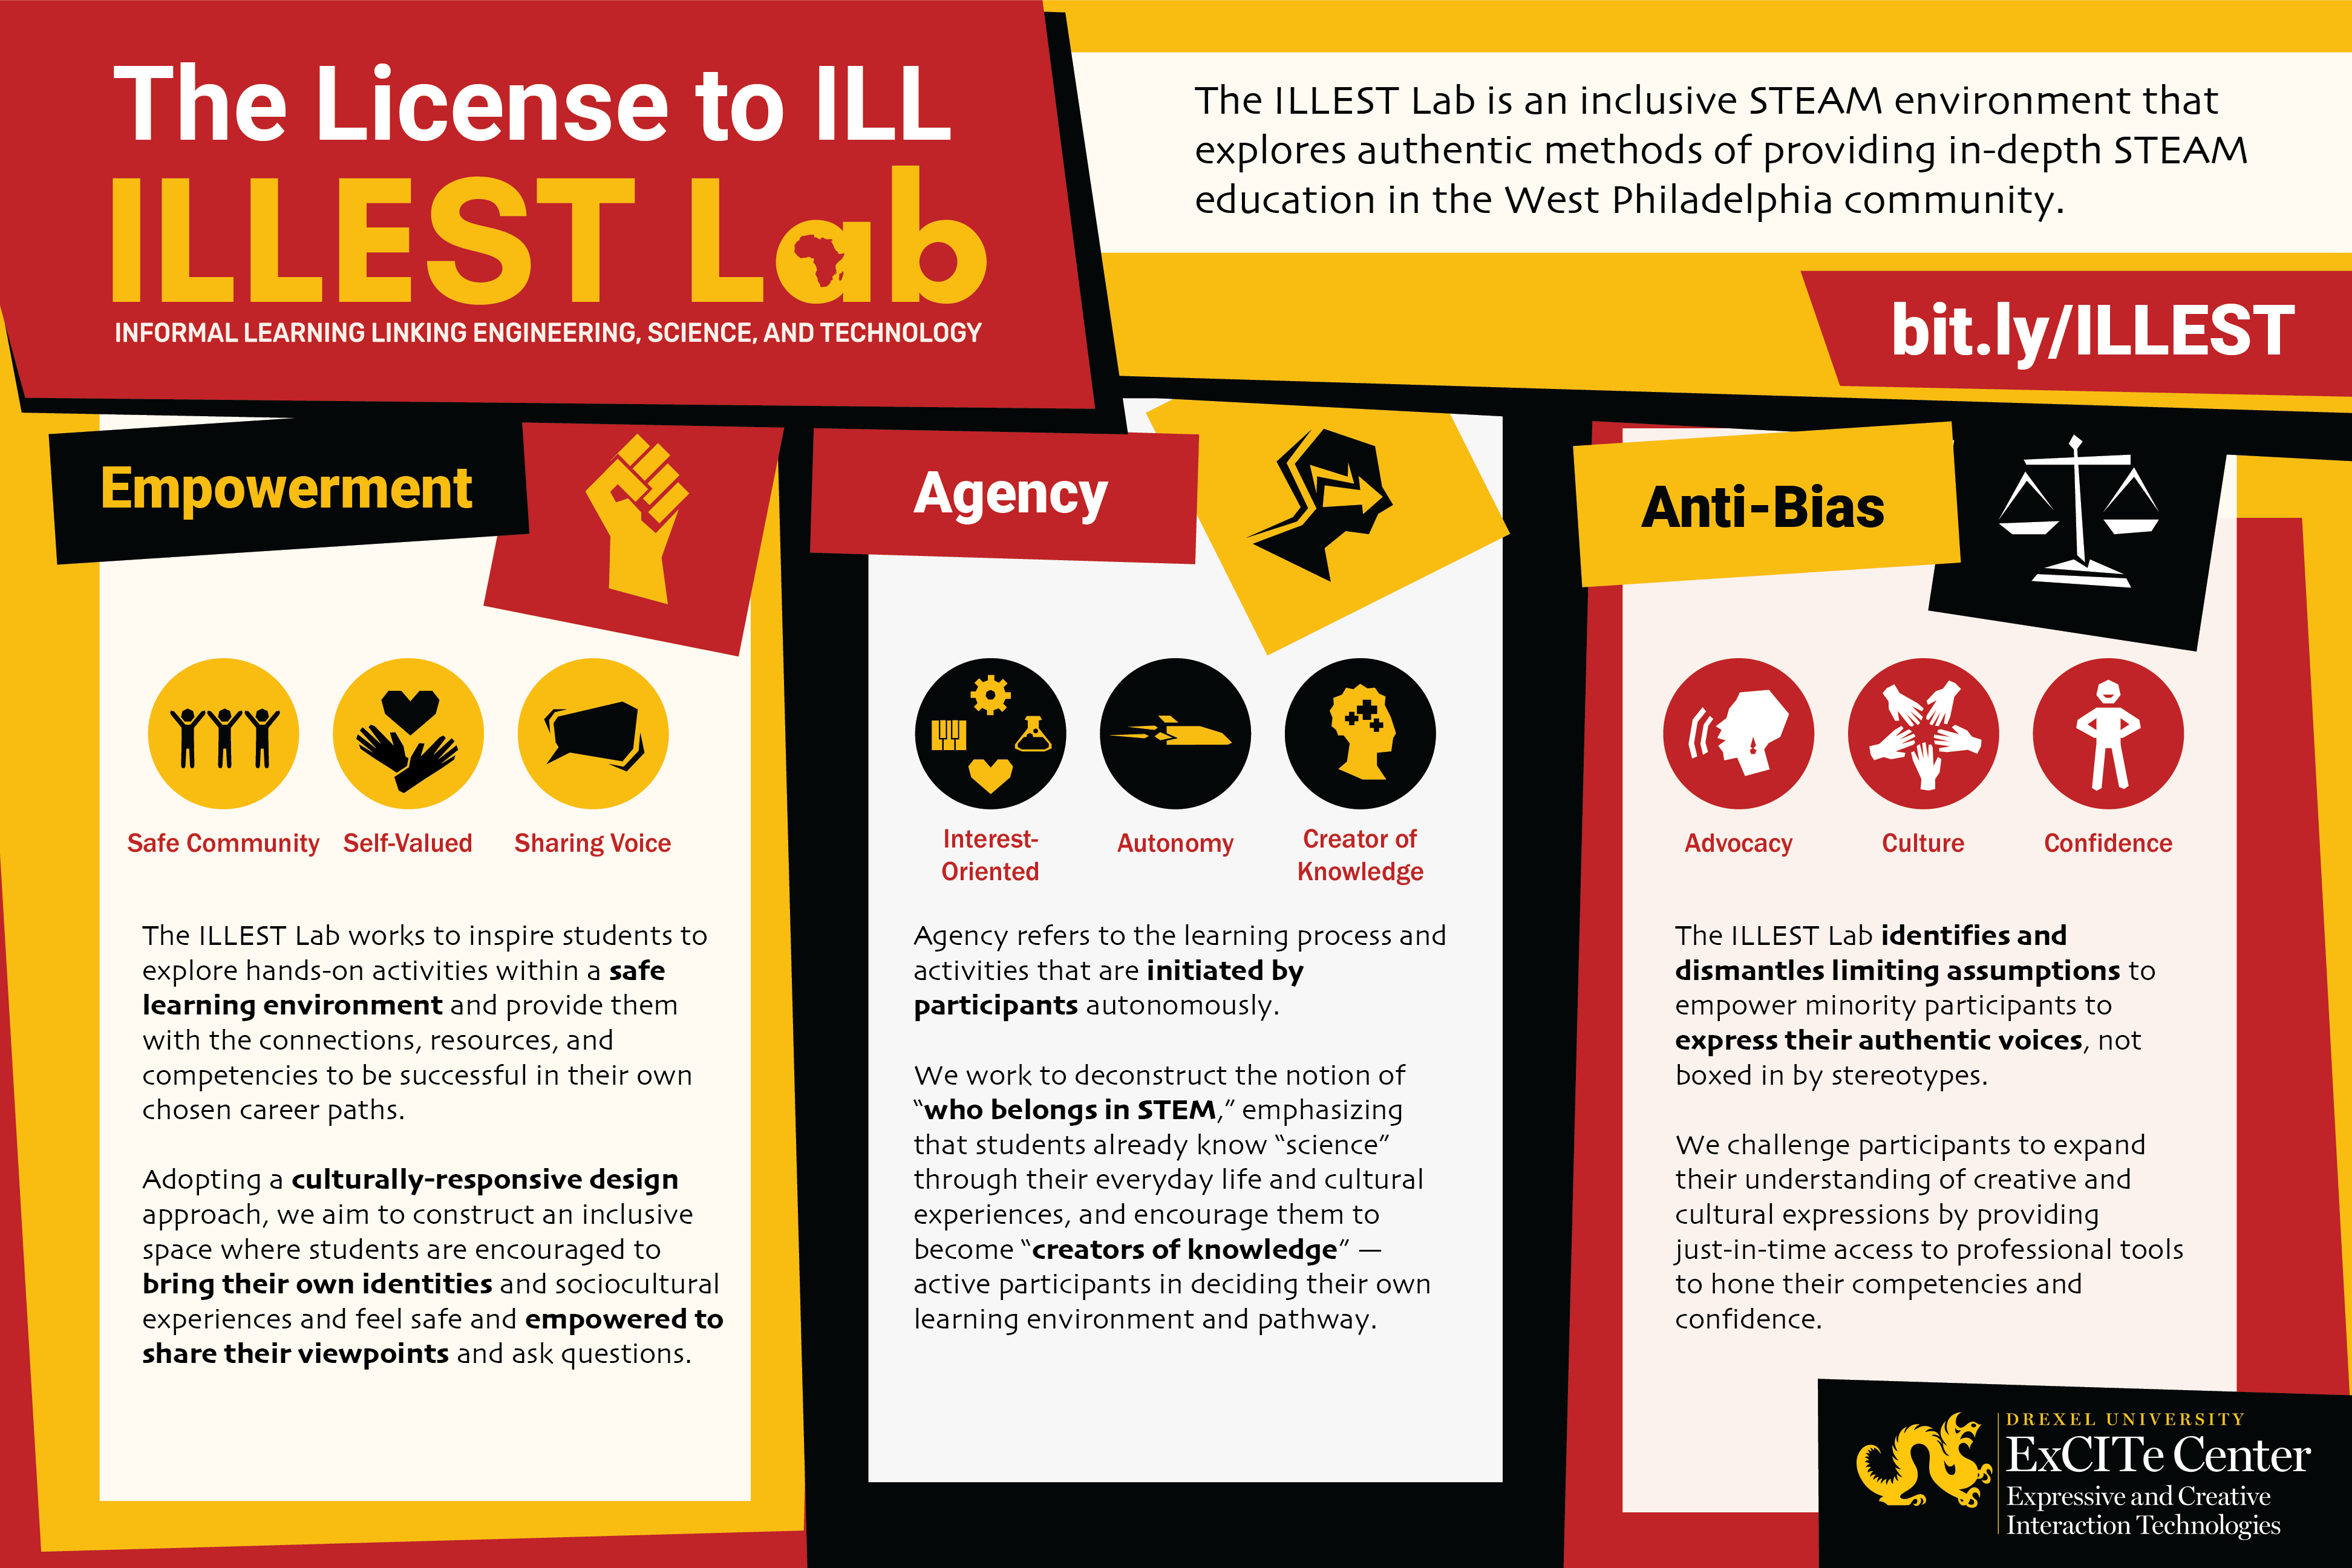 License to ILL—ILLEST MISSION GRAPHIC